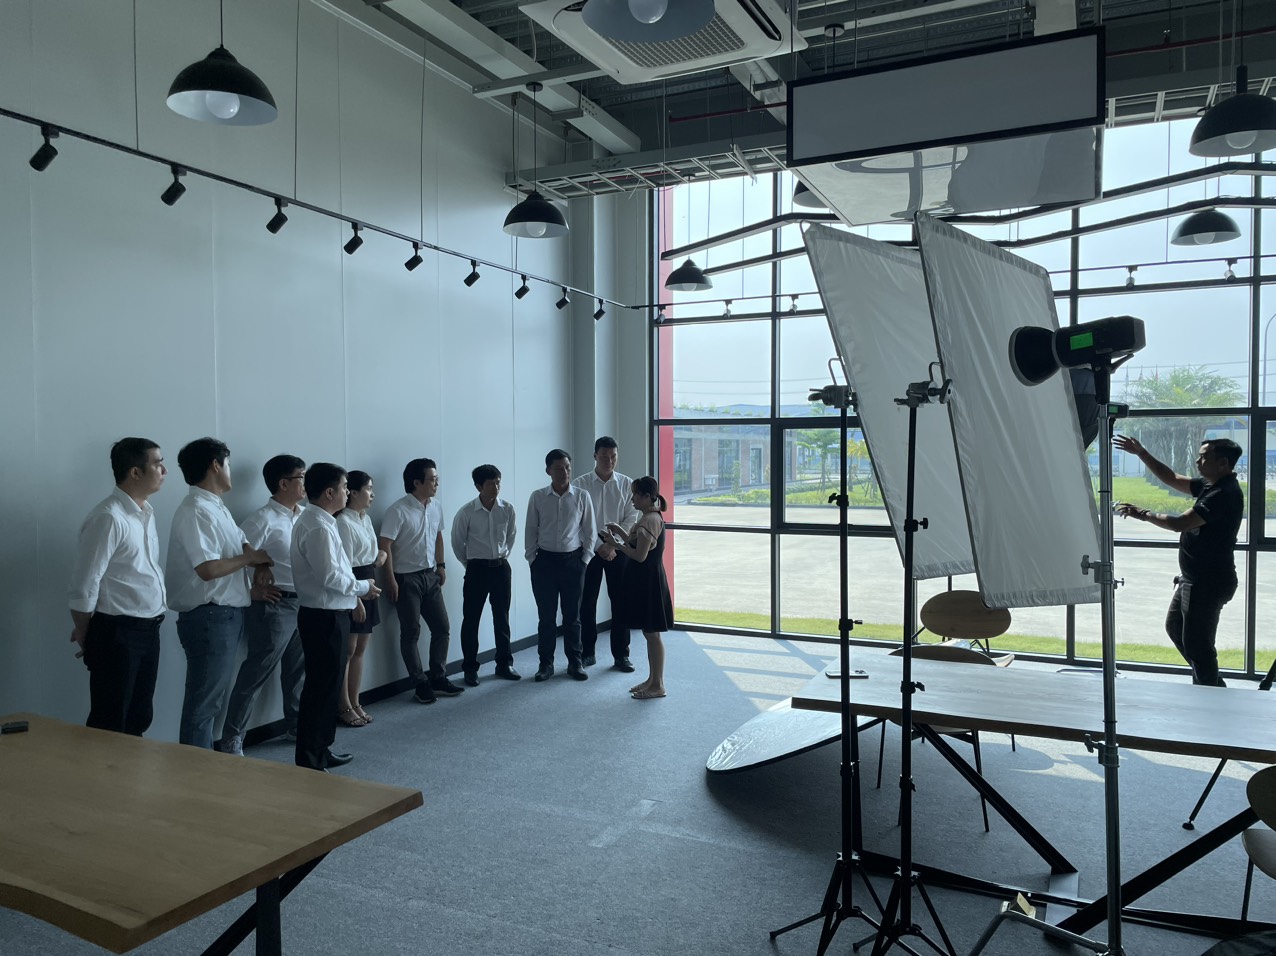 Jay Jay Vina Co., LTD held a photo shooting in hornor of senior management